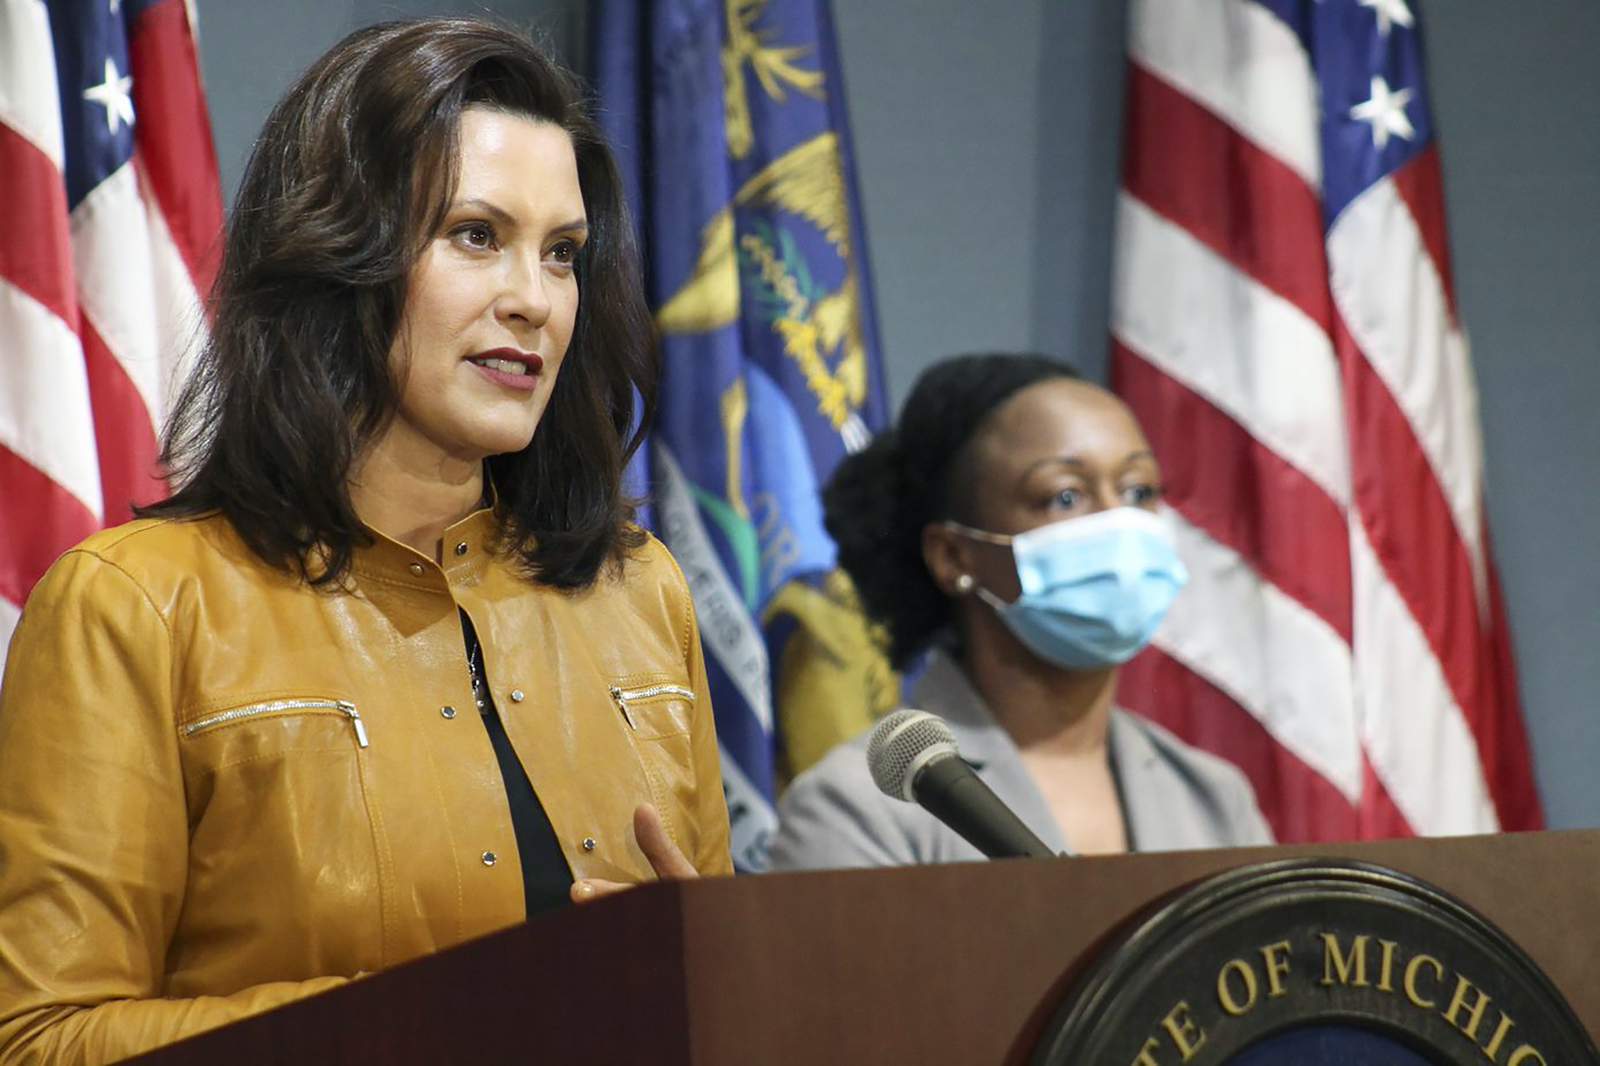 Hair, nail, massage businesses to reopen across Michigan on June 15, Gov. Whitmer says